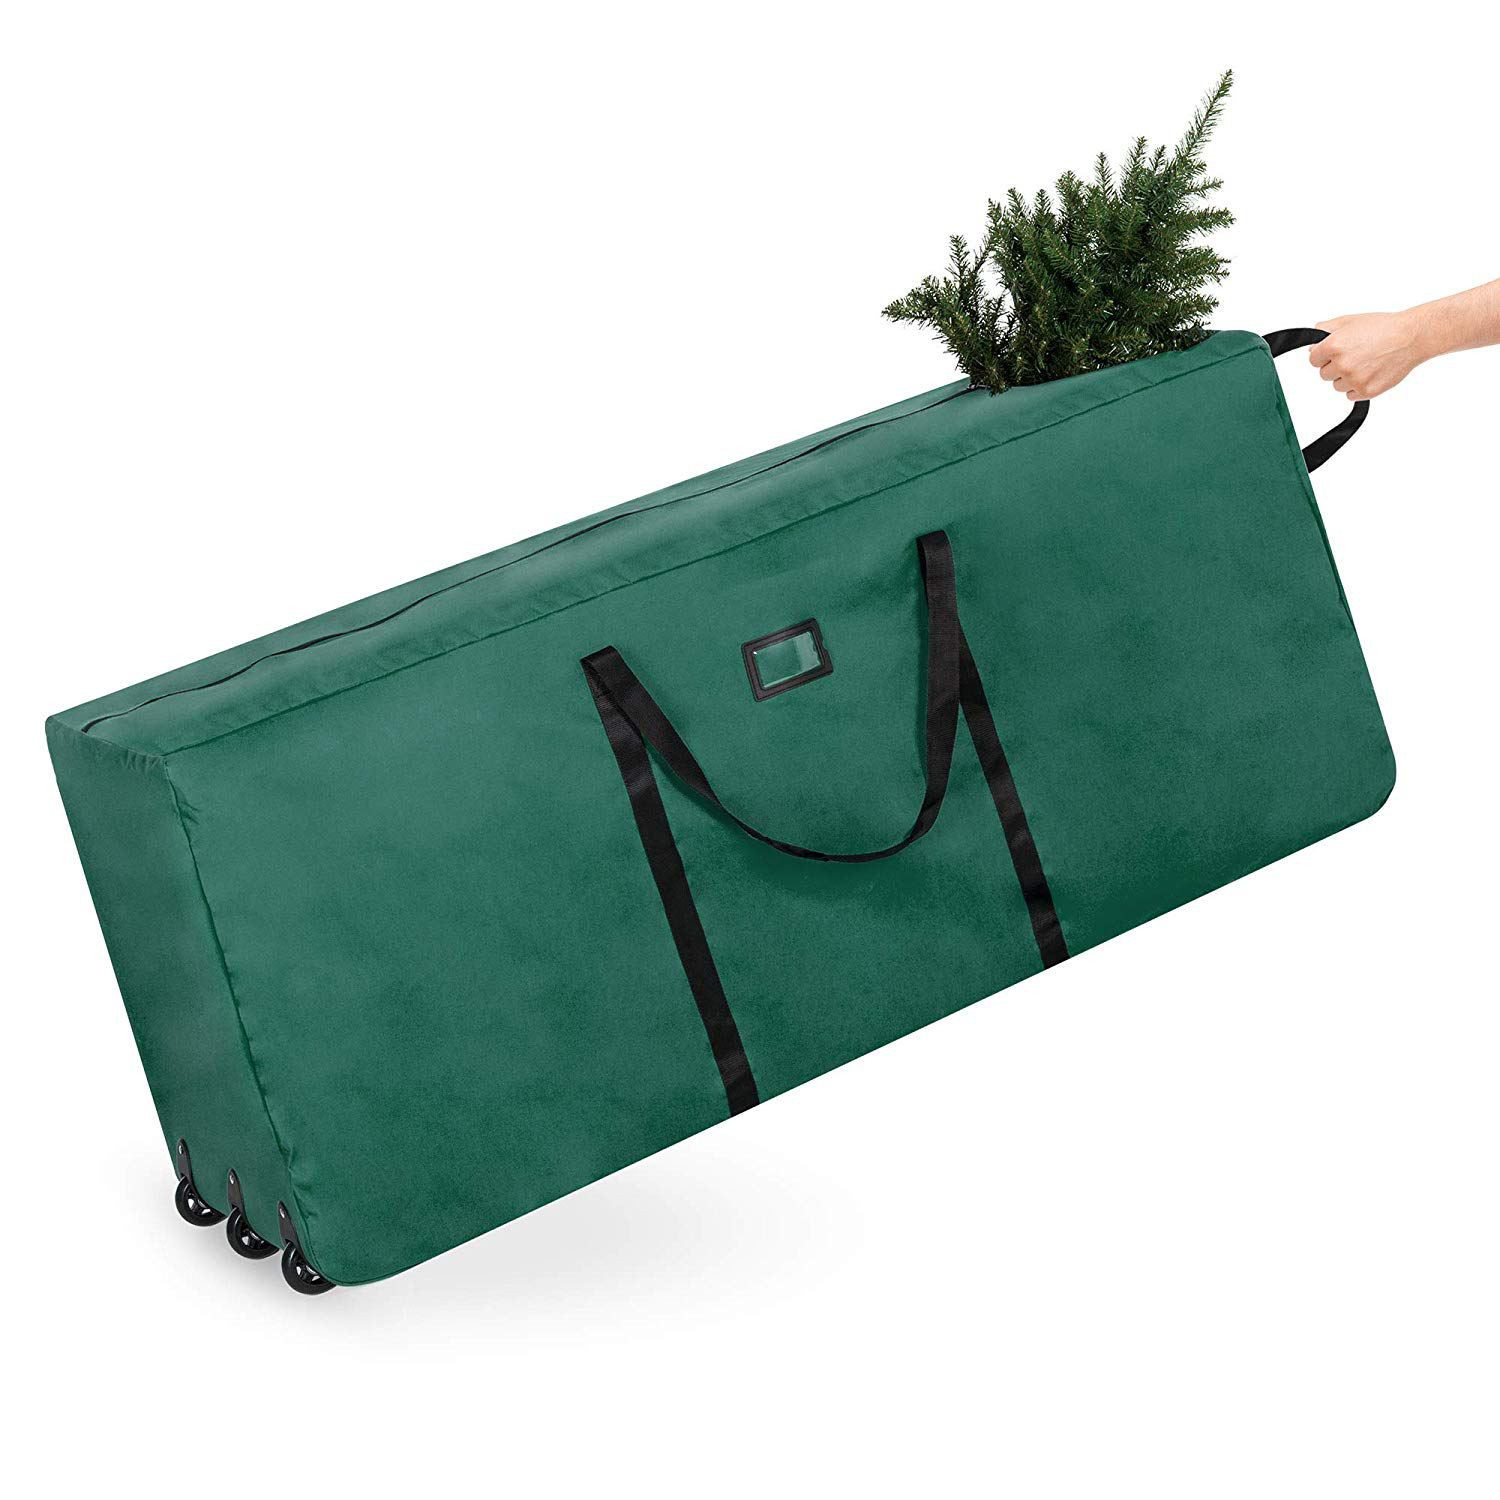 9 Ft Christmas Tree Storage
 The 8 Best Christmas Tree Bags of 2019